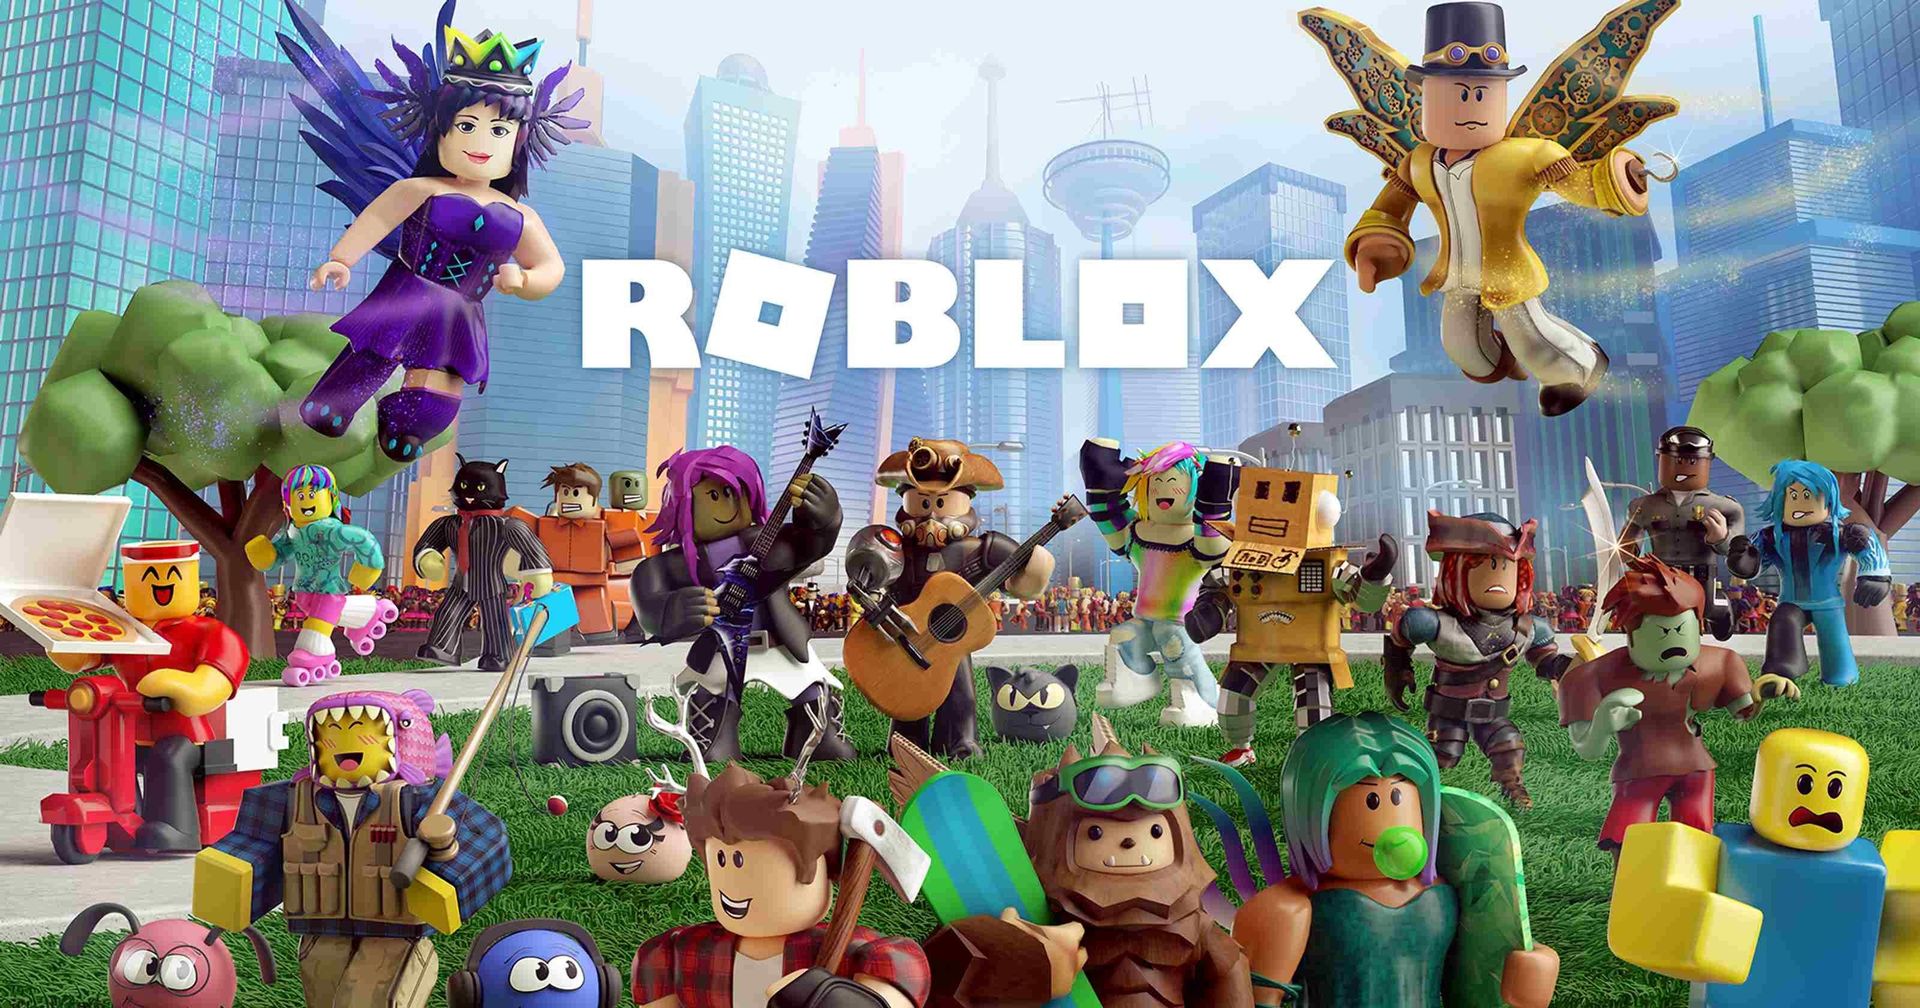 Are you loooking for active codes for Roblox Music? If the answer is yes, you have come to the right place. We are here to share the best song ID's for Roblox.